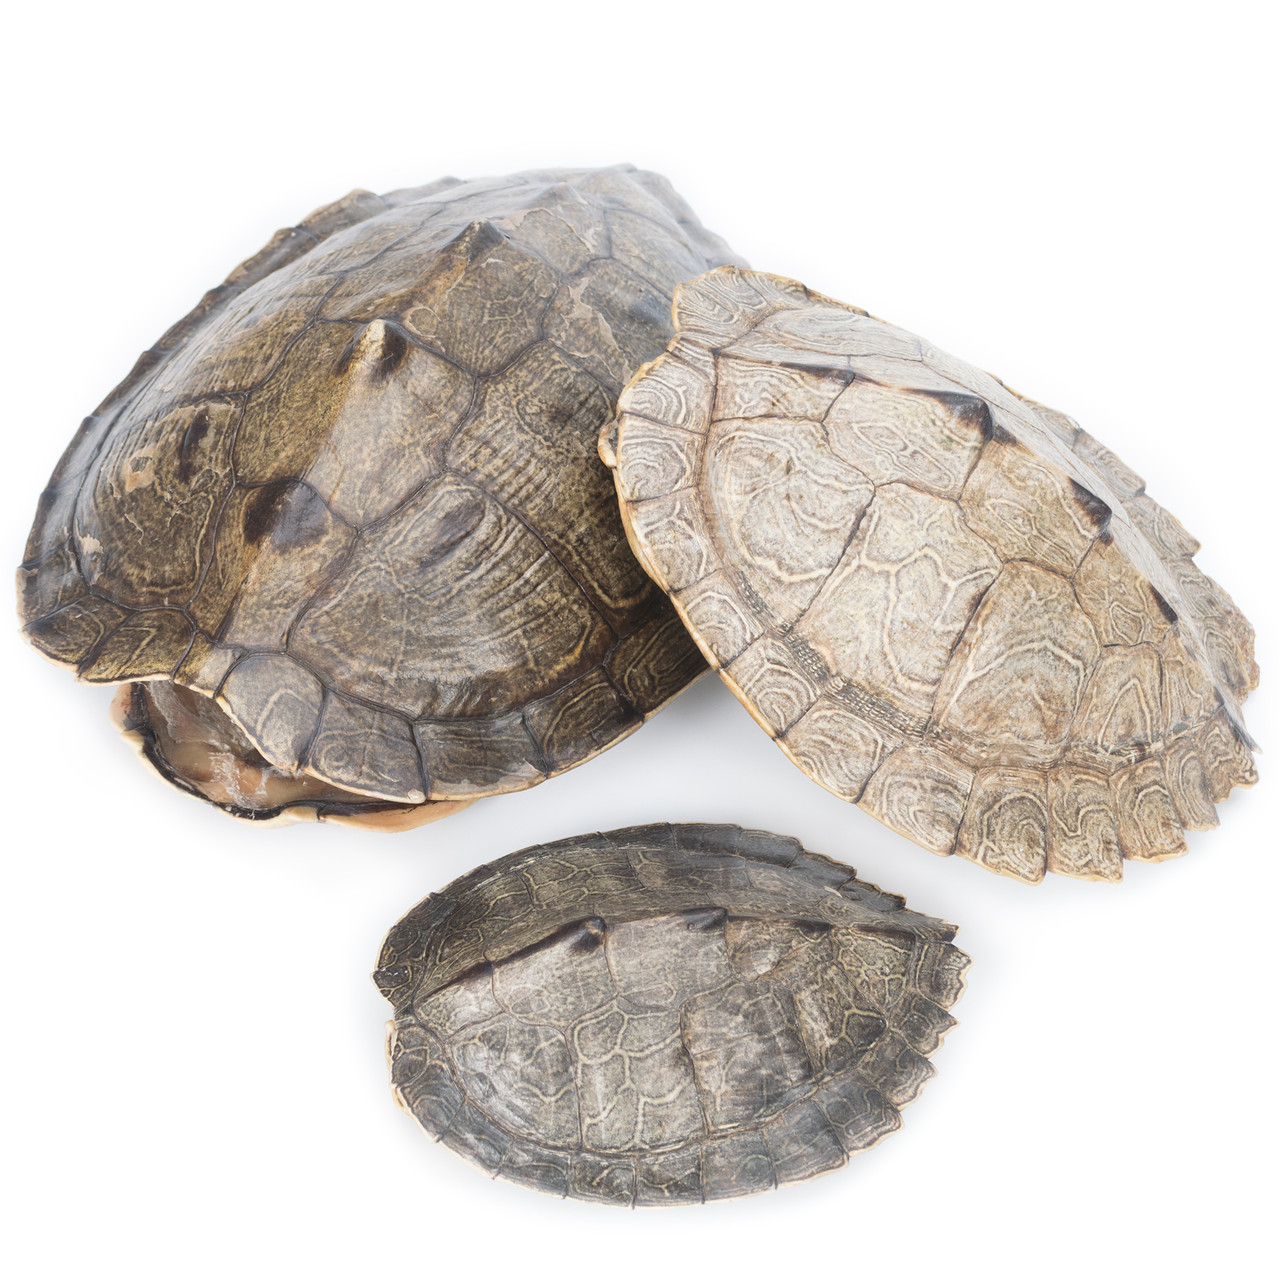 Map Turtle Shell Evolution Store,How To Keep White Shirts White Without Using Bleach